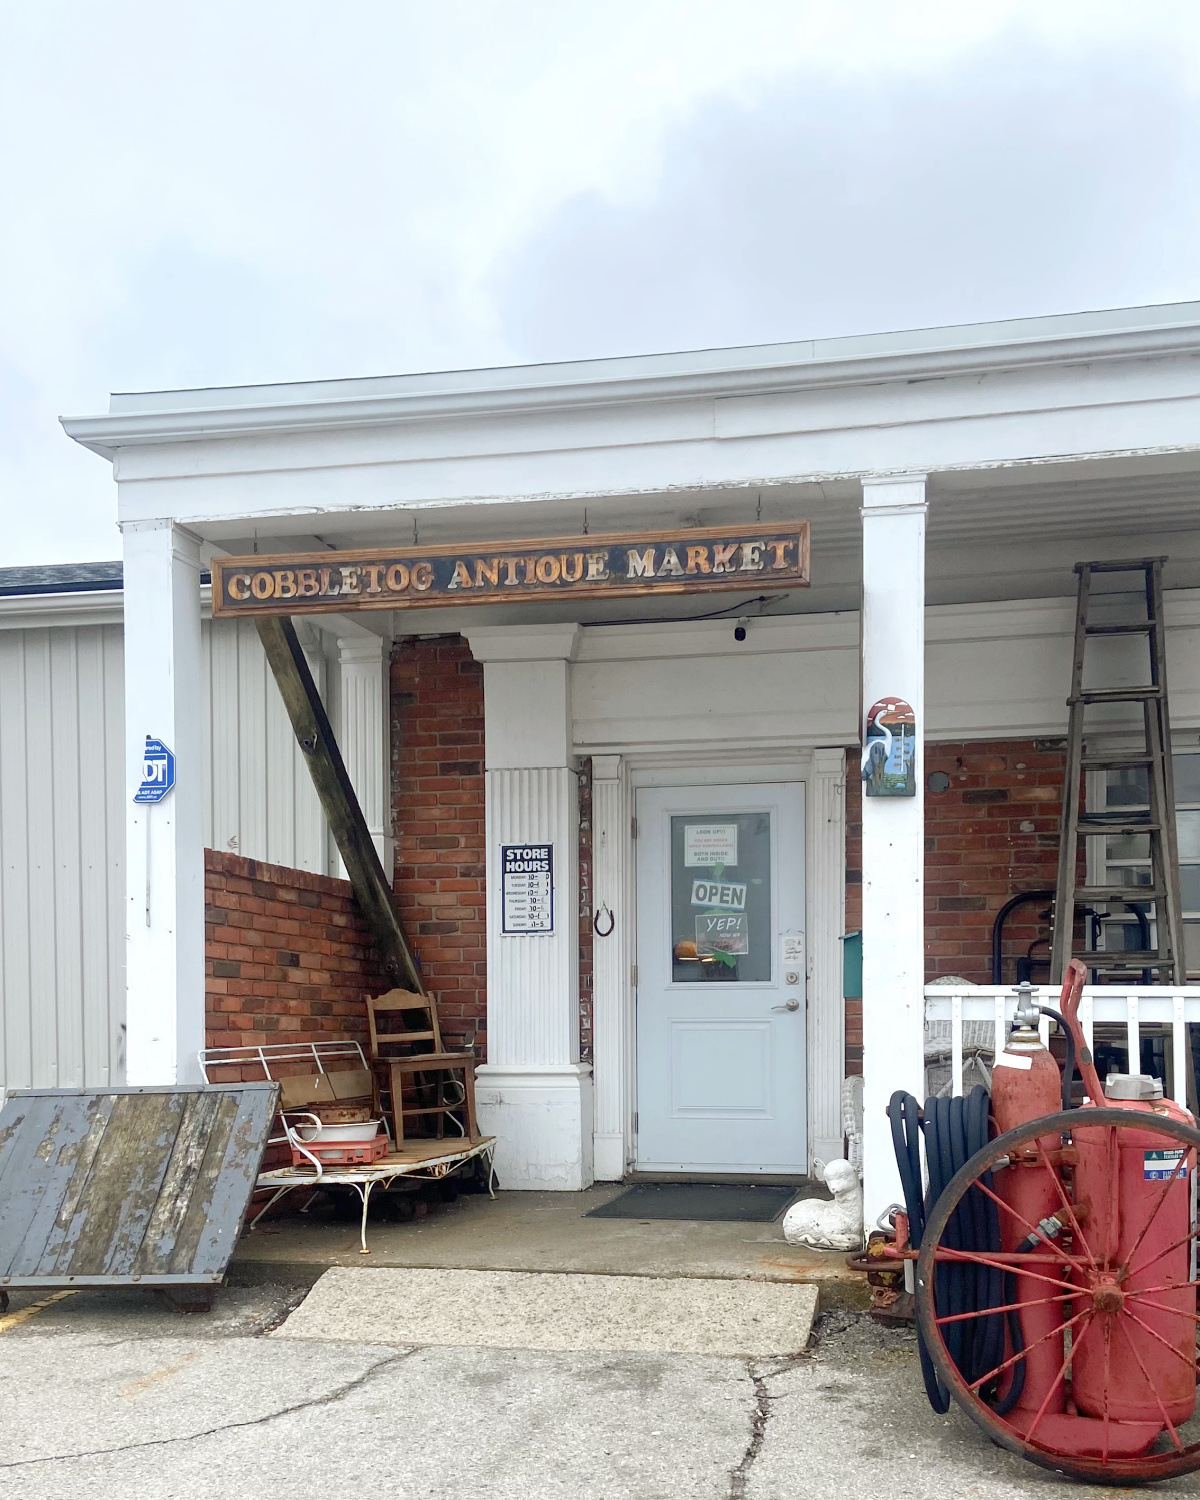 The charming entrance to the market.